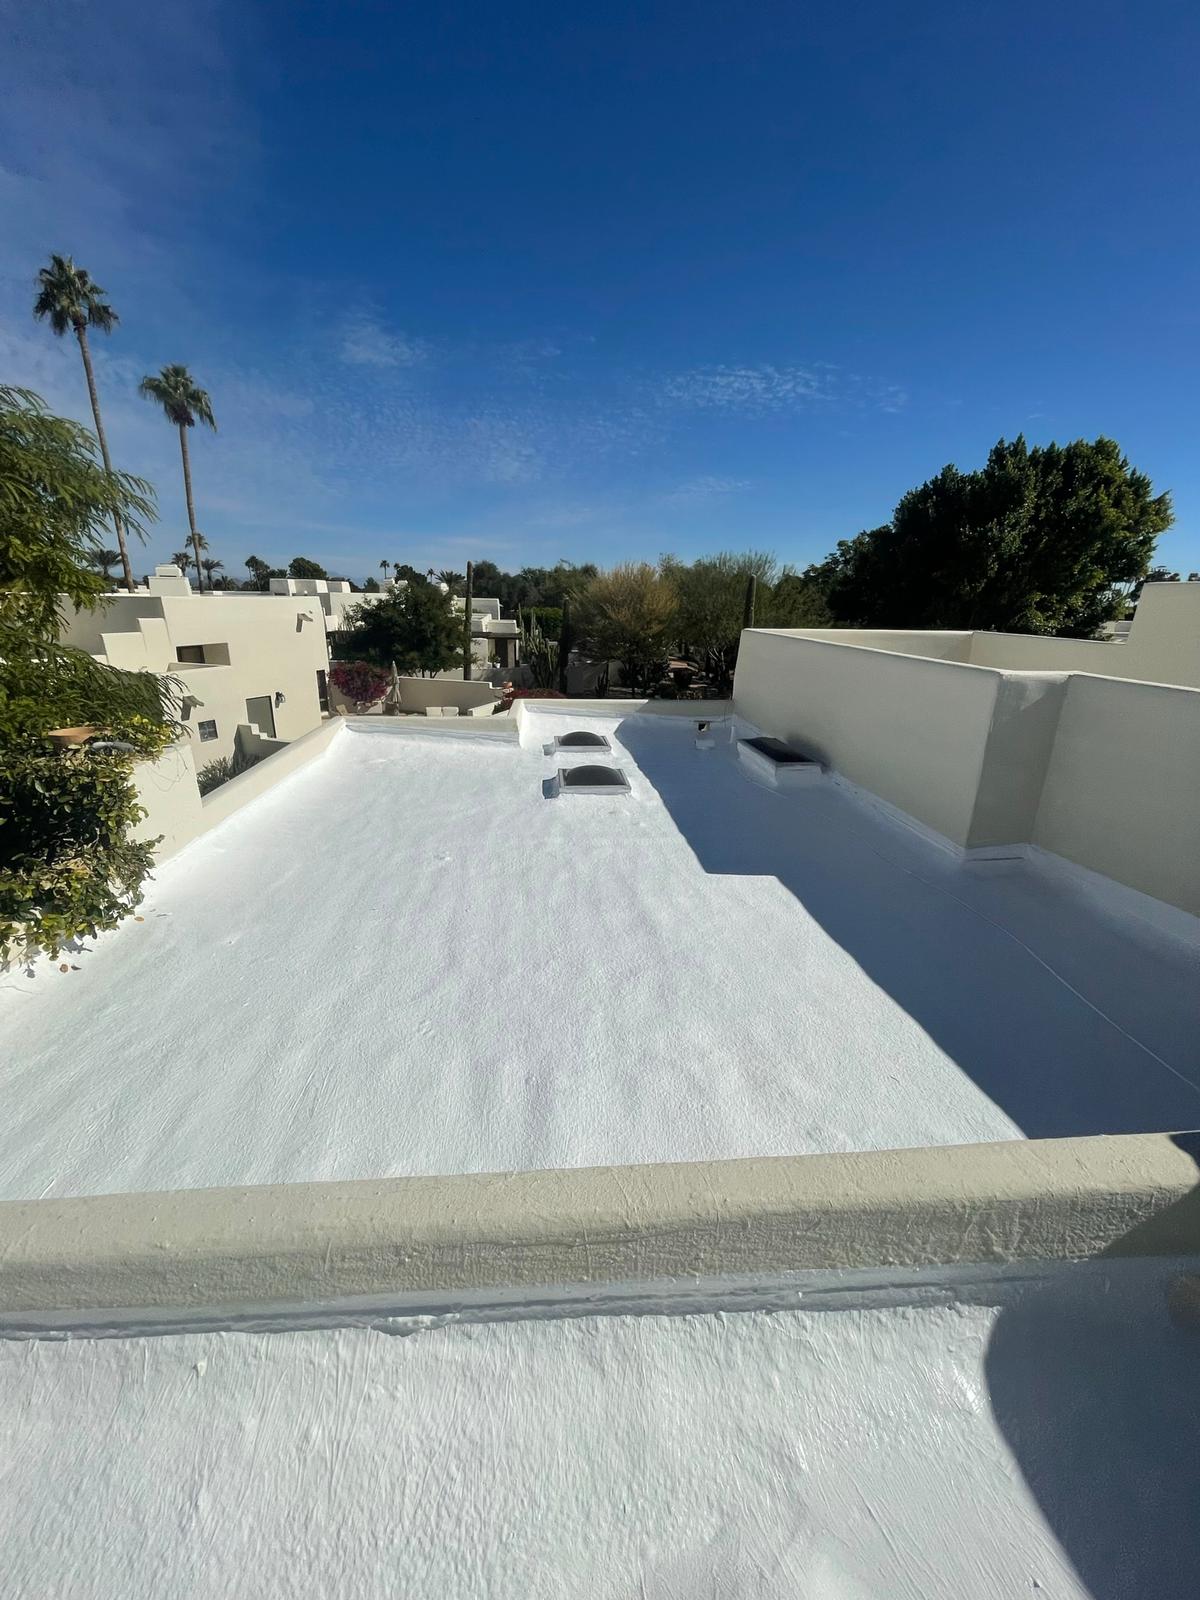 A bird's eye view of a Carefree building with a freshly installed spray foam coating, ready for weatherproofing.